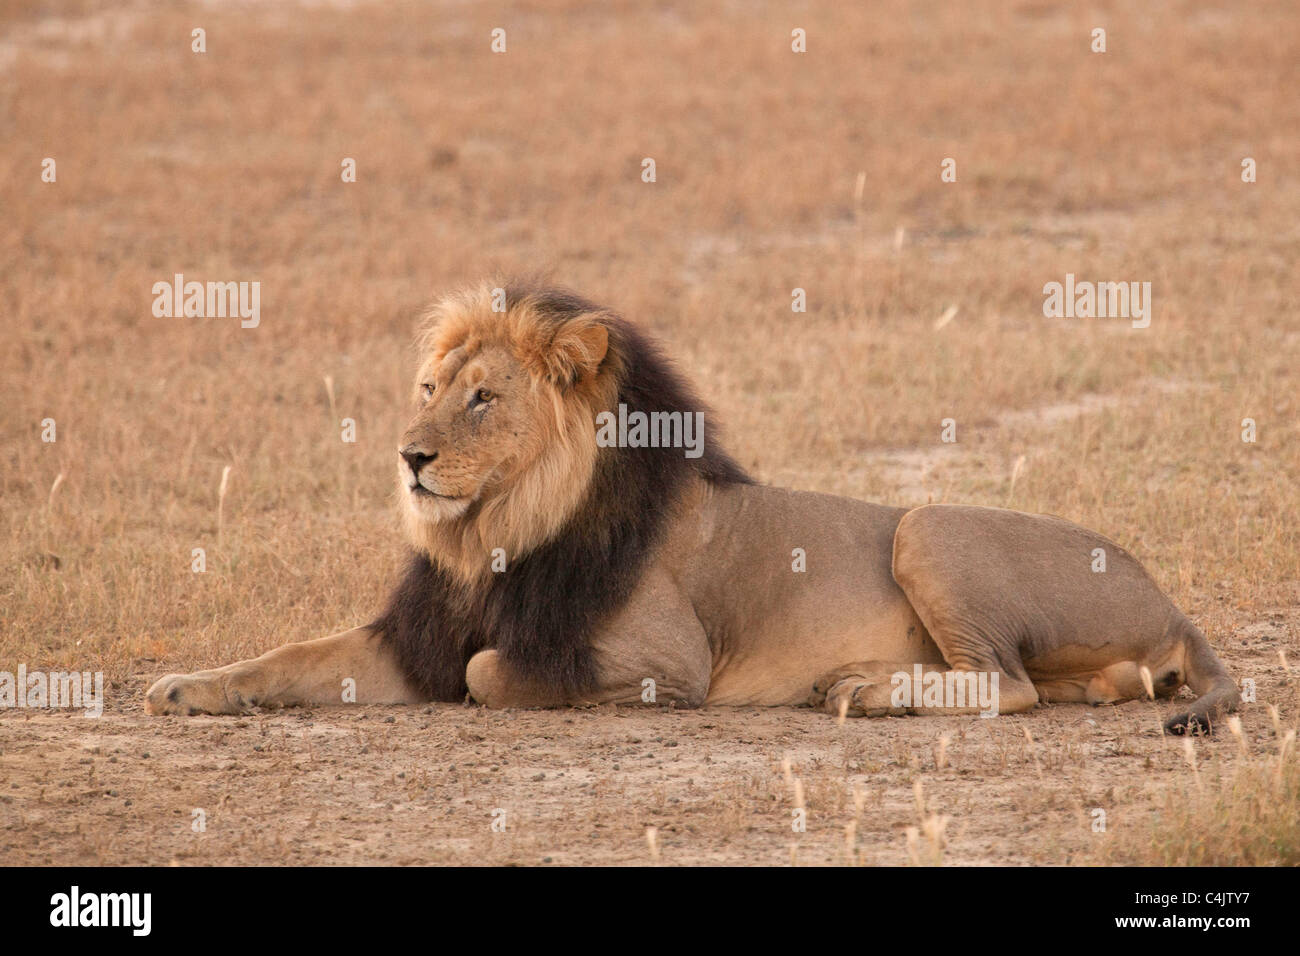 Lion (Panthera Leo) In Kgalagadi Transfontier Park, South Africa Stock Photo